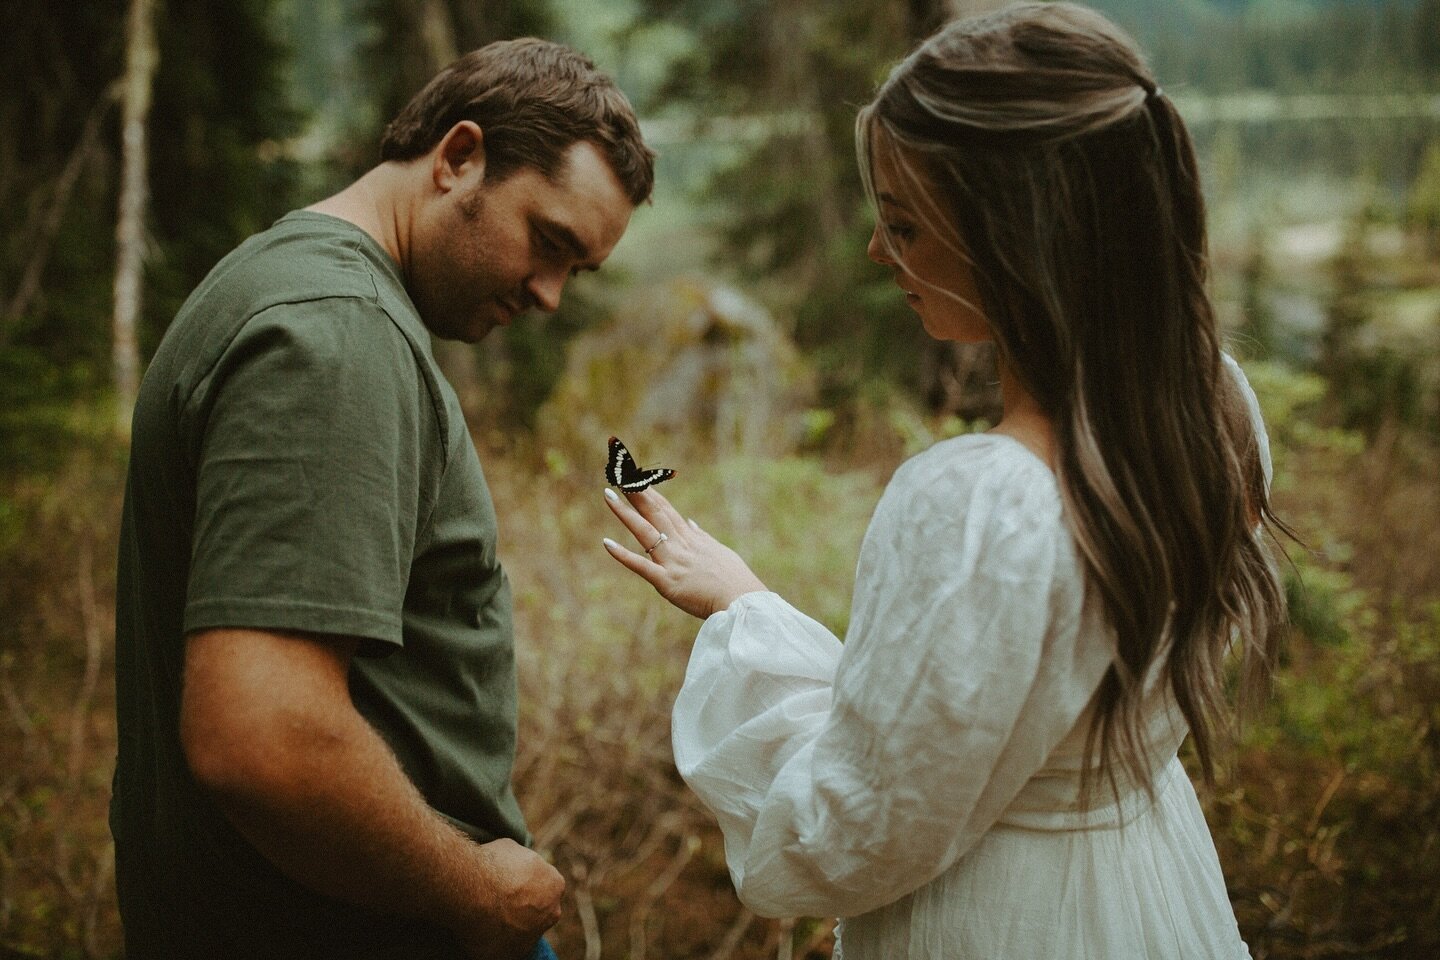 I can&rsquo;t believe I&rsquo;m writing this&hellip;but this magical image was just named as an Honourable Mention in @junebugweddings Best of Engagement Photo contest 🦋

This day was one of those days that reminded me why I took a risk and moved to